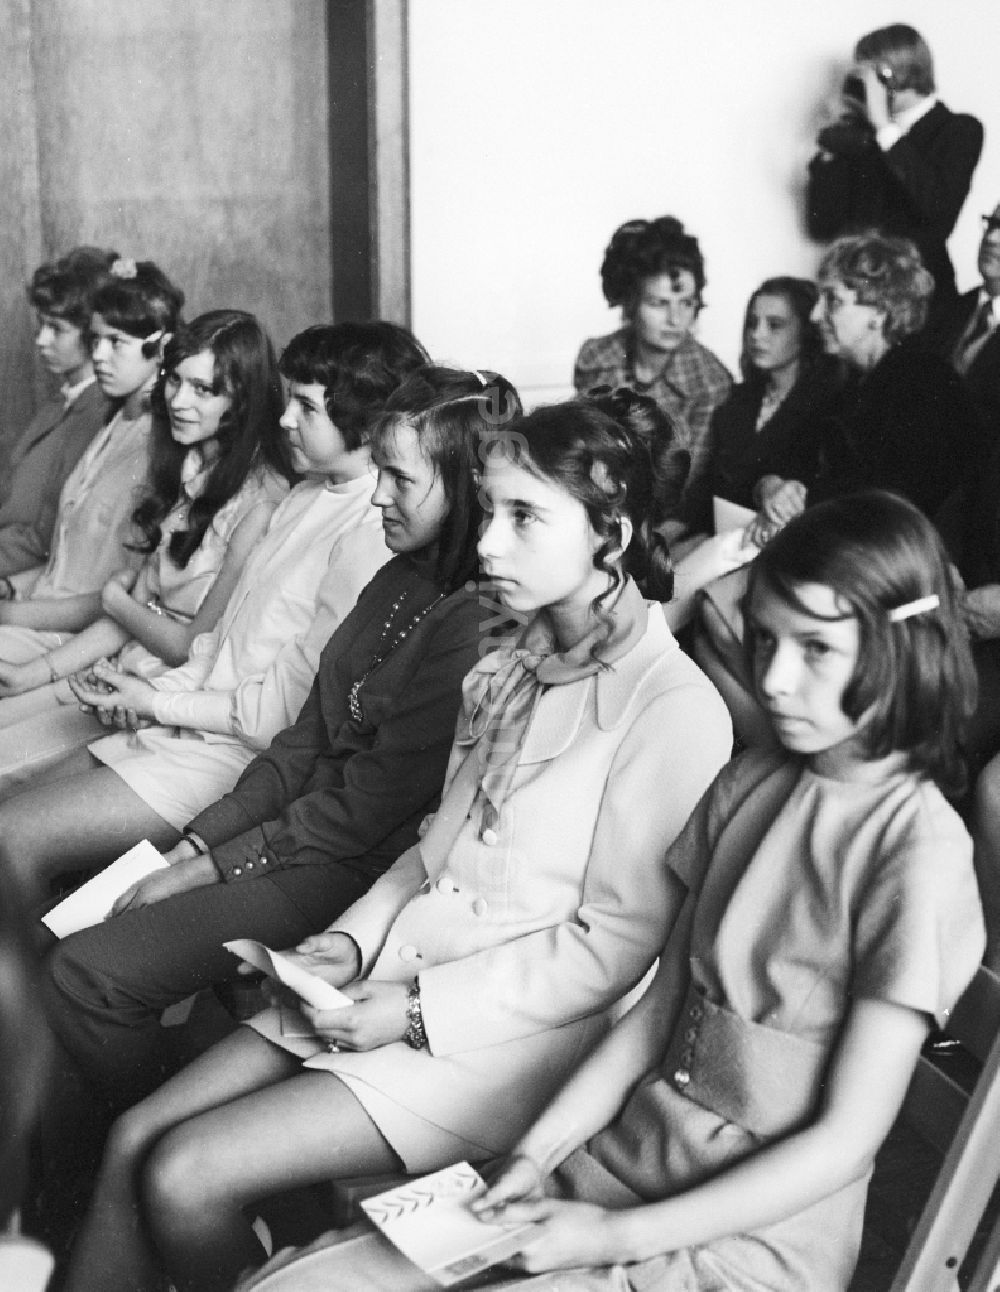 GDR photo archive: Berlin - Youth Dedication Ceremony participants sitting on chairs and waiting in Berlin, the former capital of the GDR, the German Democratic Republic